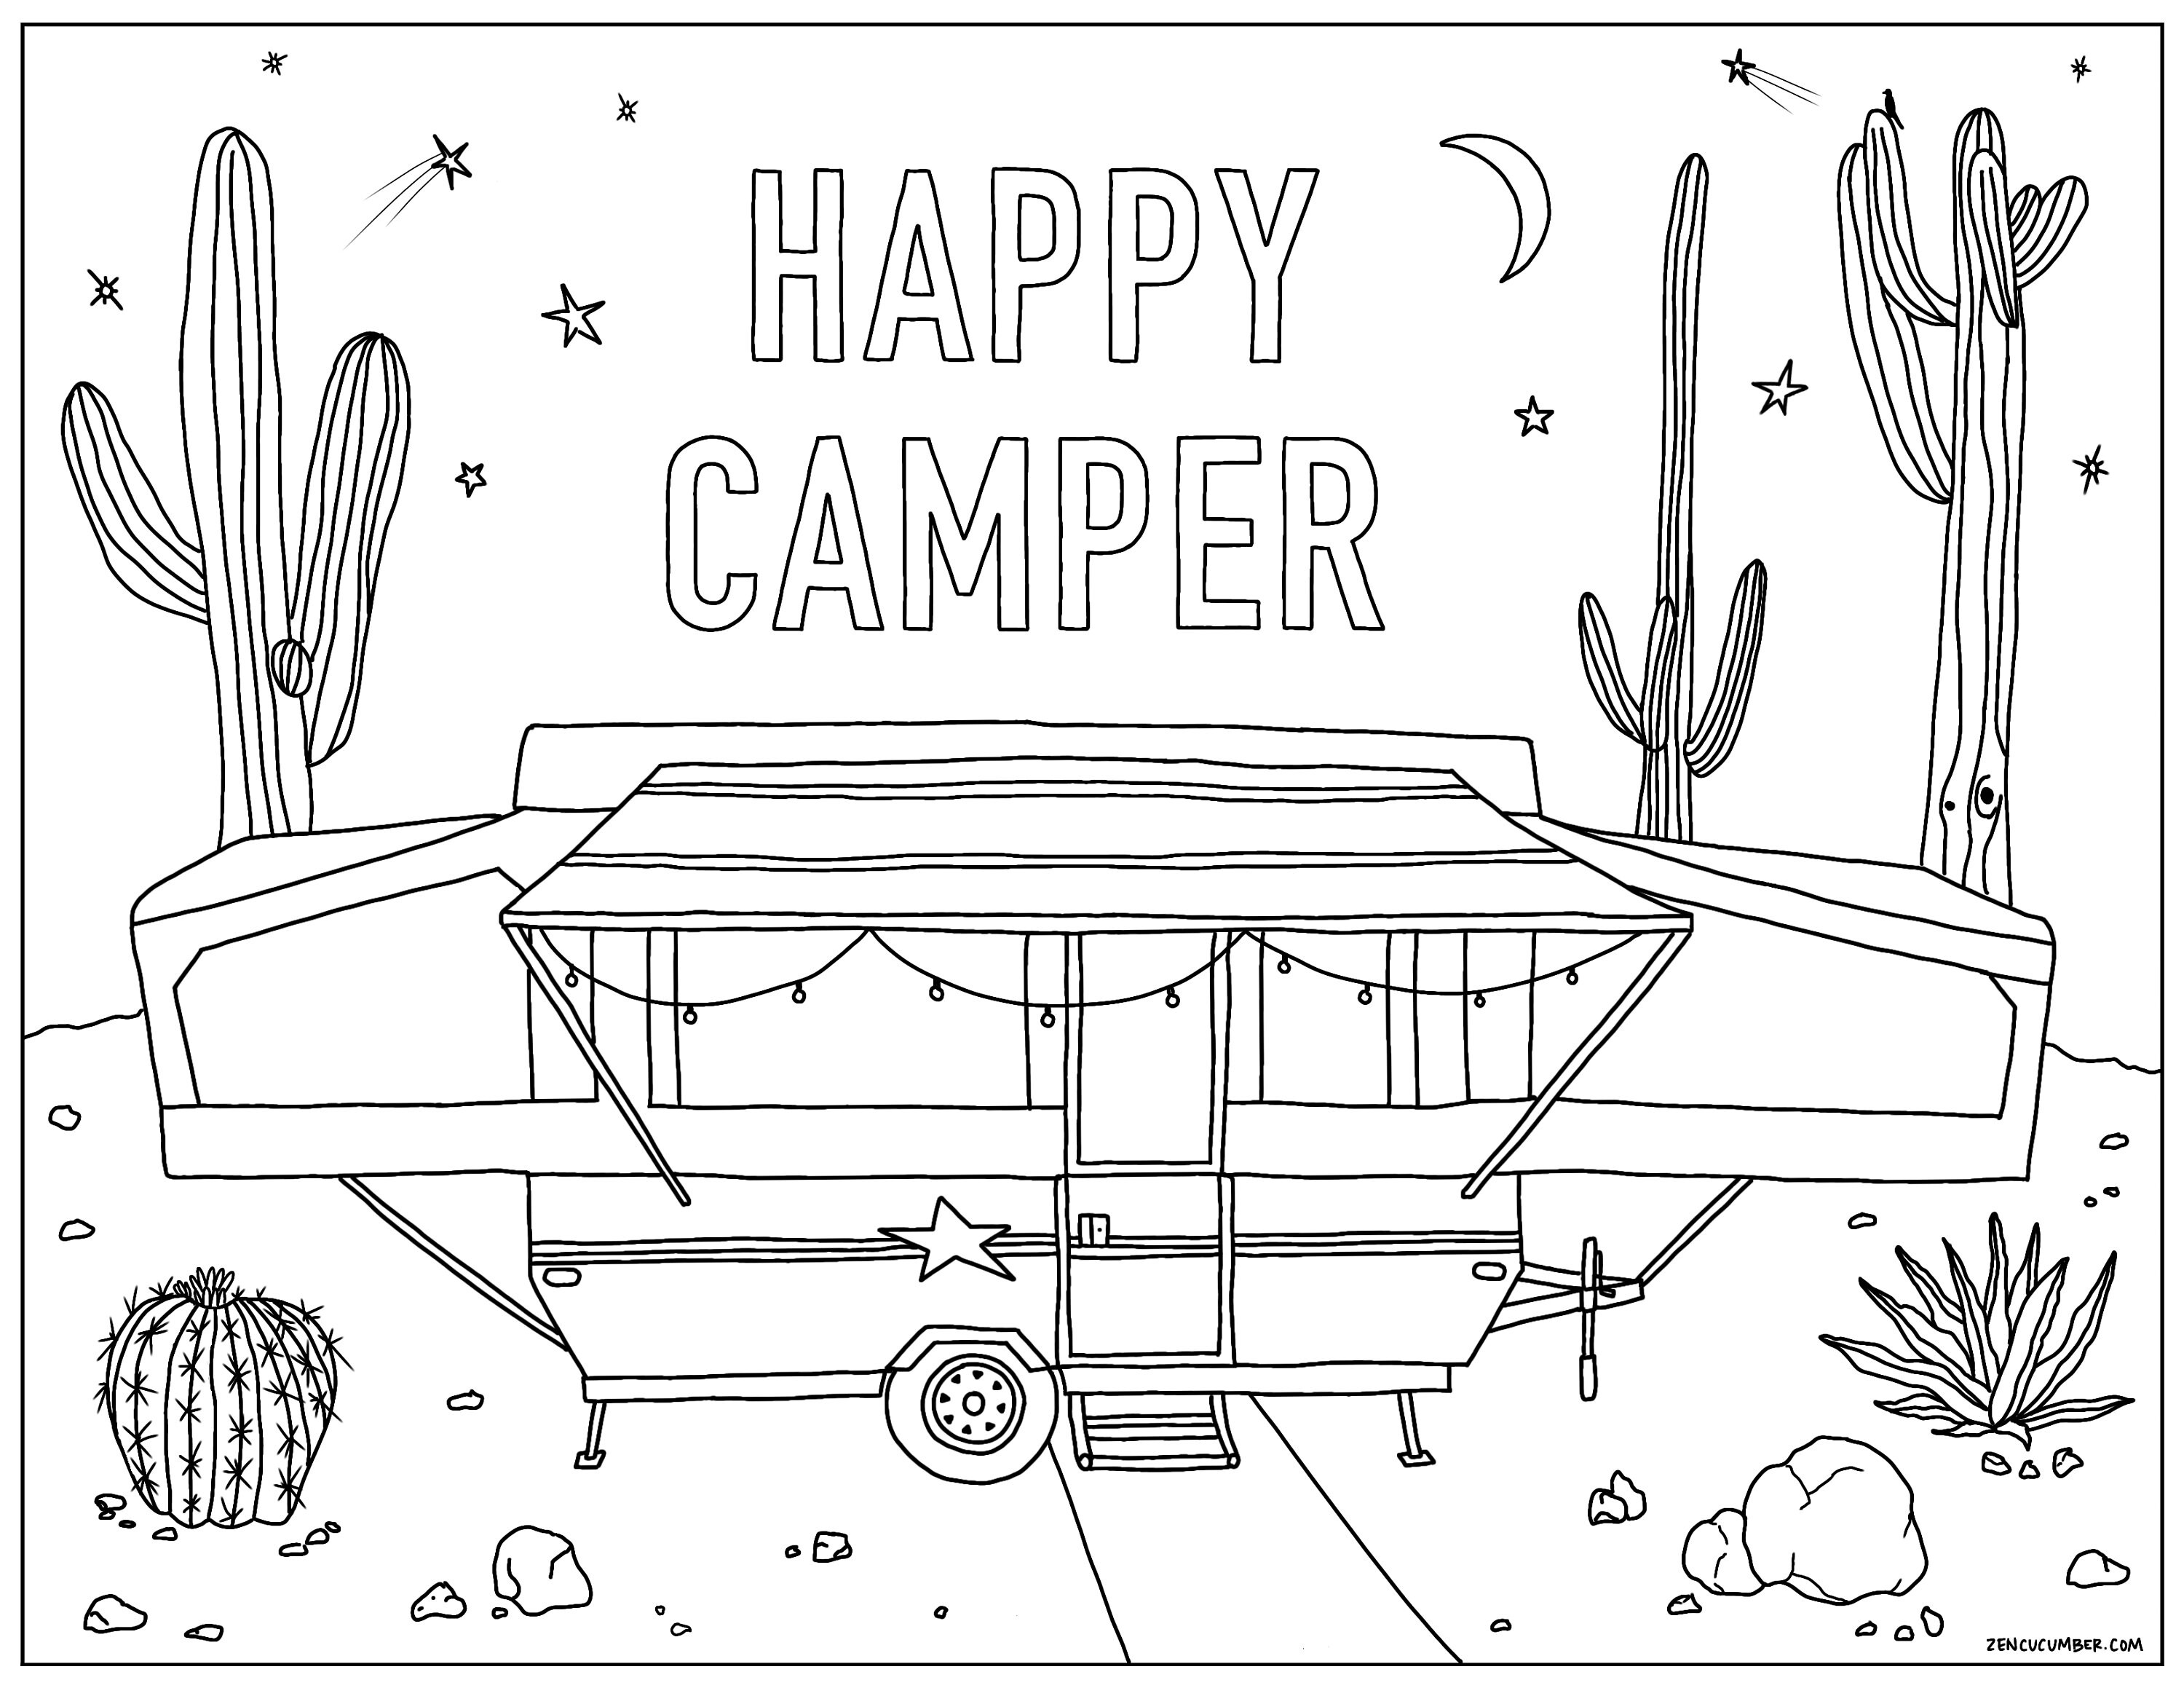 Vintage Camper Coloring Page Free Printable Coloring Pages Images And 